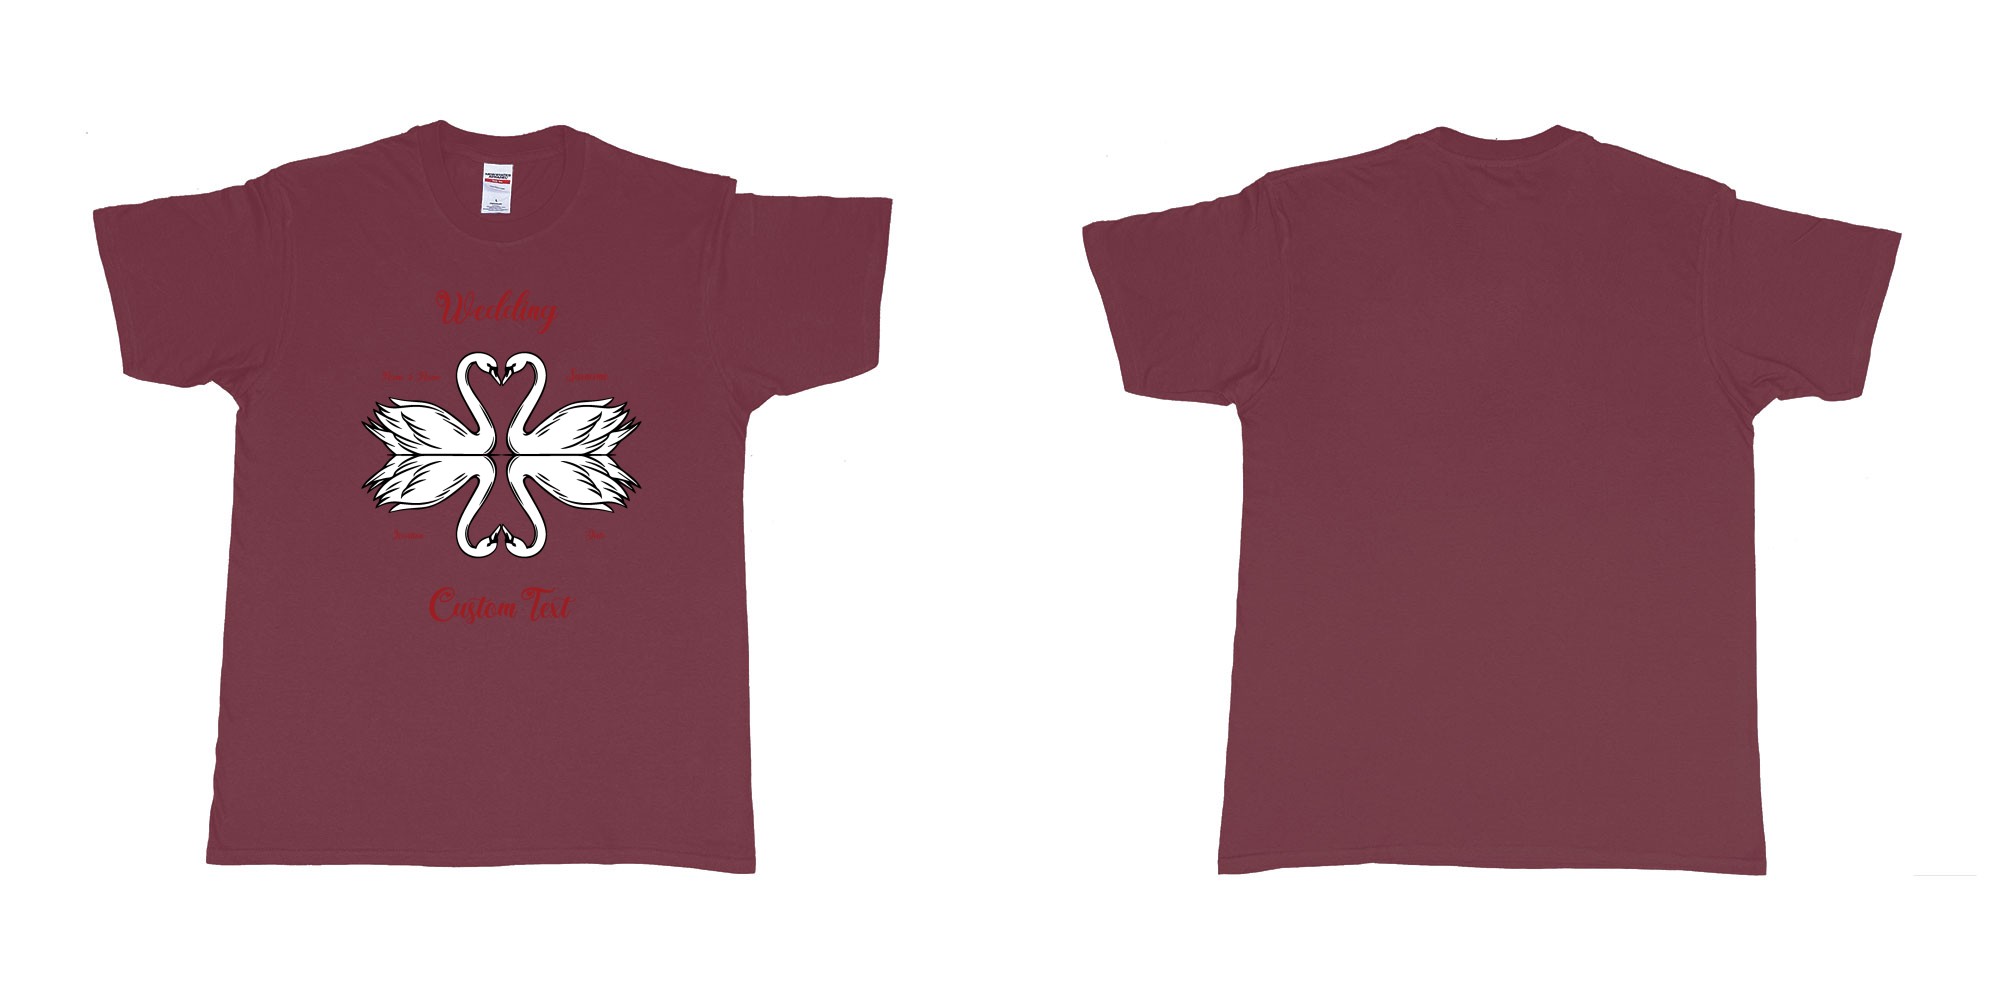 Custom tshirt design swans hearts reflection in fabric color marron choice your own text made in Bali by The Pirate Way